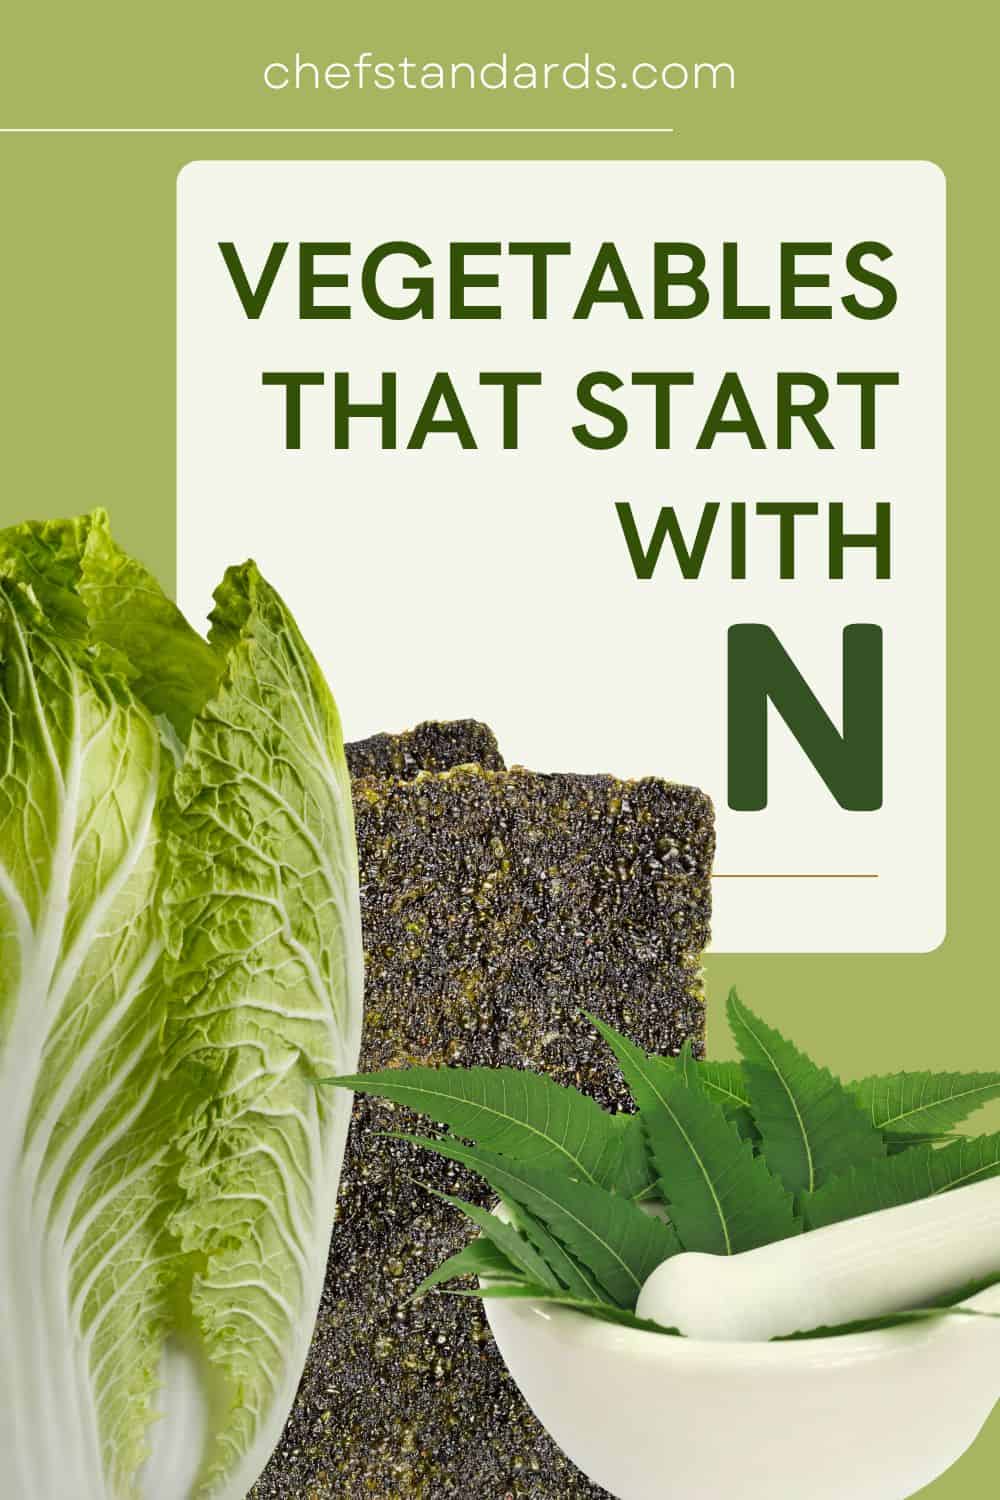 13 Intriguing Vegetables That Start With N + FUN Facts